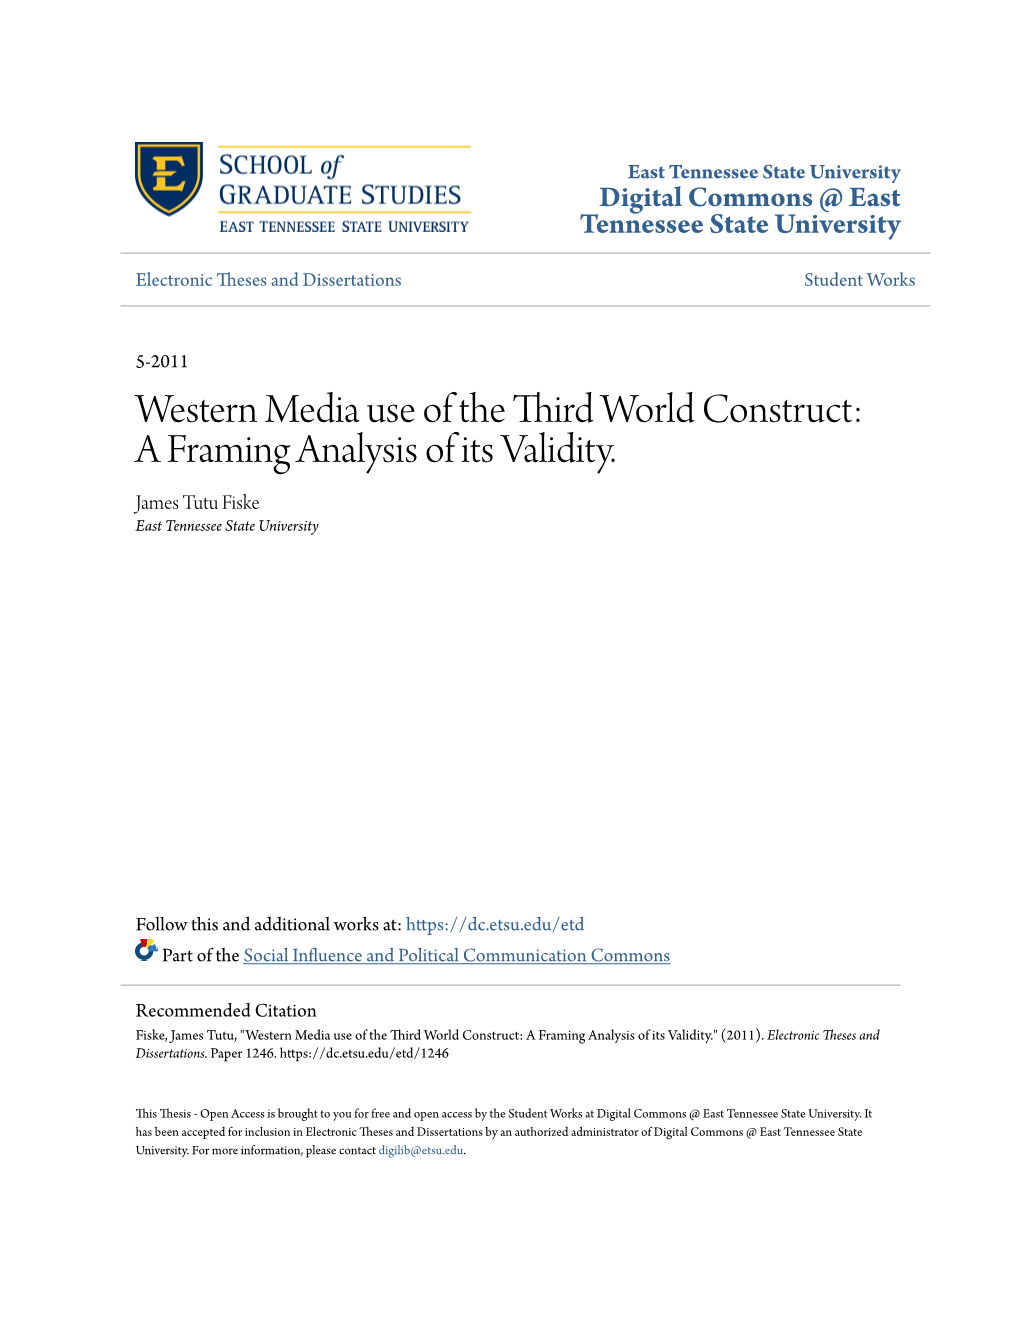 Western Media Use of the Third World Construct: a Framing Analysis of Its Validity